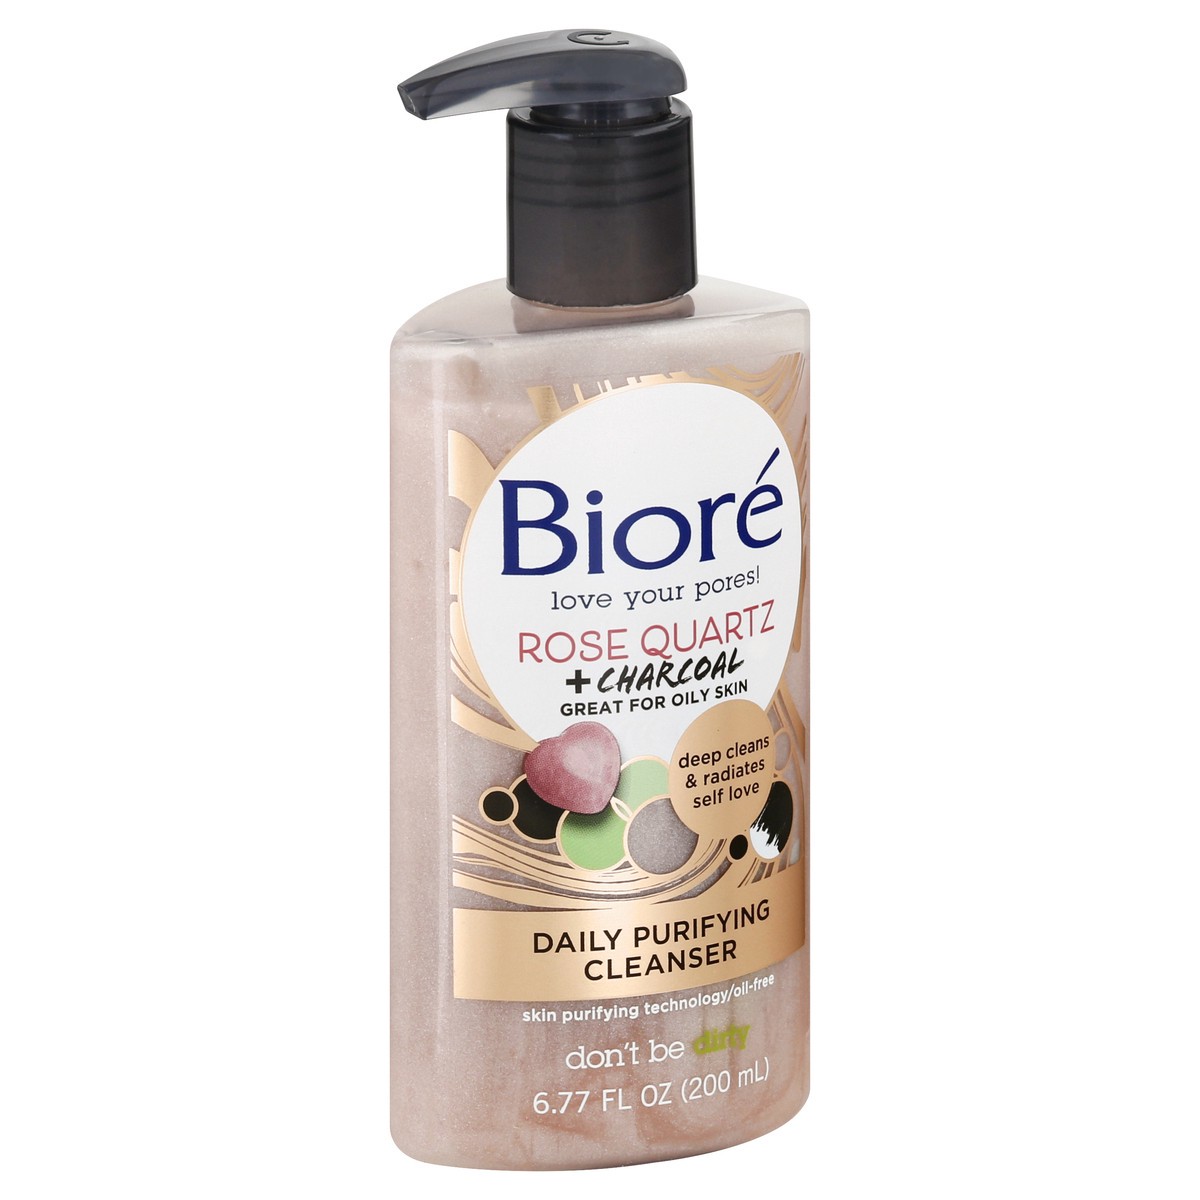 slide 2 of 9, Biore Rose Quartz + Charcoal Cleanser Daily Purifying Cleanser, 6.77 oz